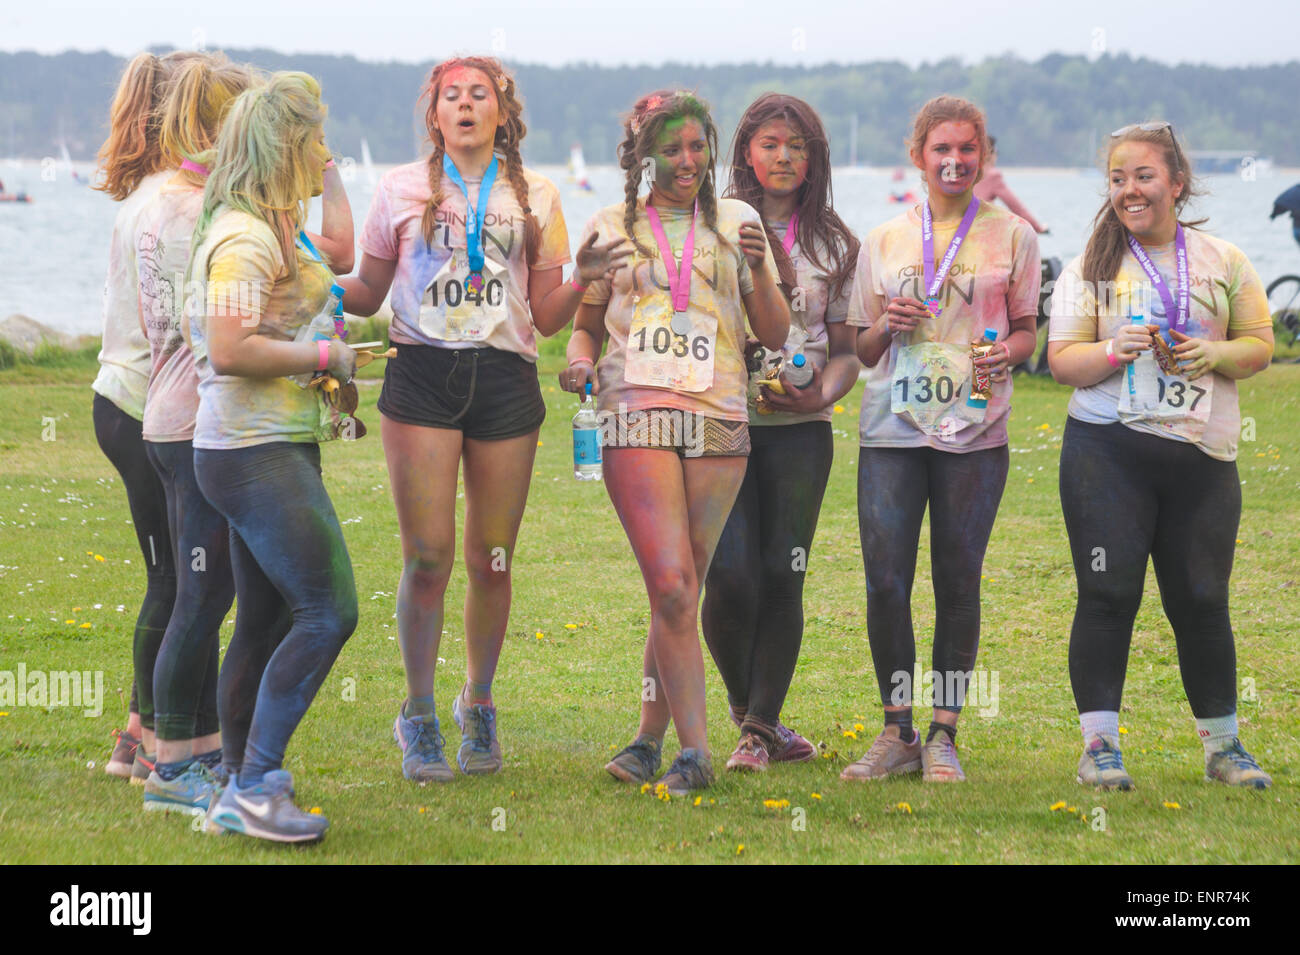 Poole, Dorset, UK. 10th May, 2015. Dorset’s first Rainbow Run takes place at Baiter Park, Poole. More than 1500 runners take part in the 3k charity race organised by Naomi House and Jacksplace children’s hospices near Winchester to raise funds for their Caterpillar Appeal. Credit:  Carolyn Jenkins/Alamy Live News Stock Photo